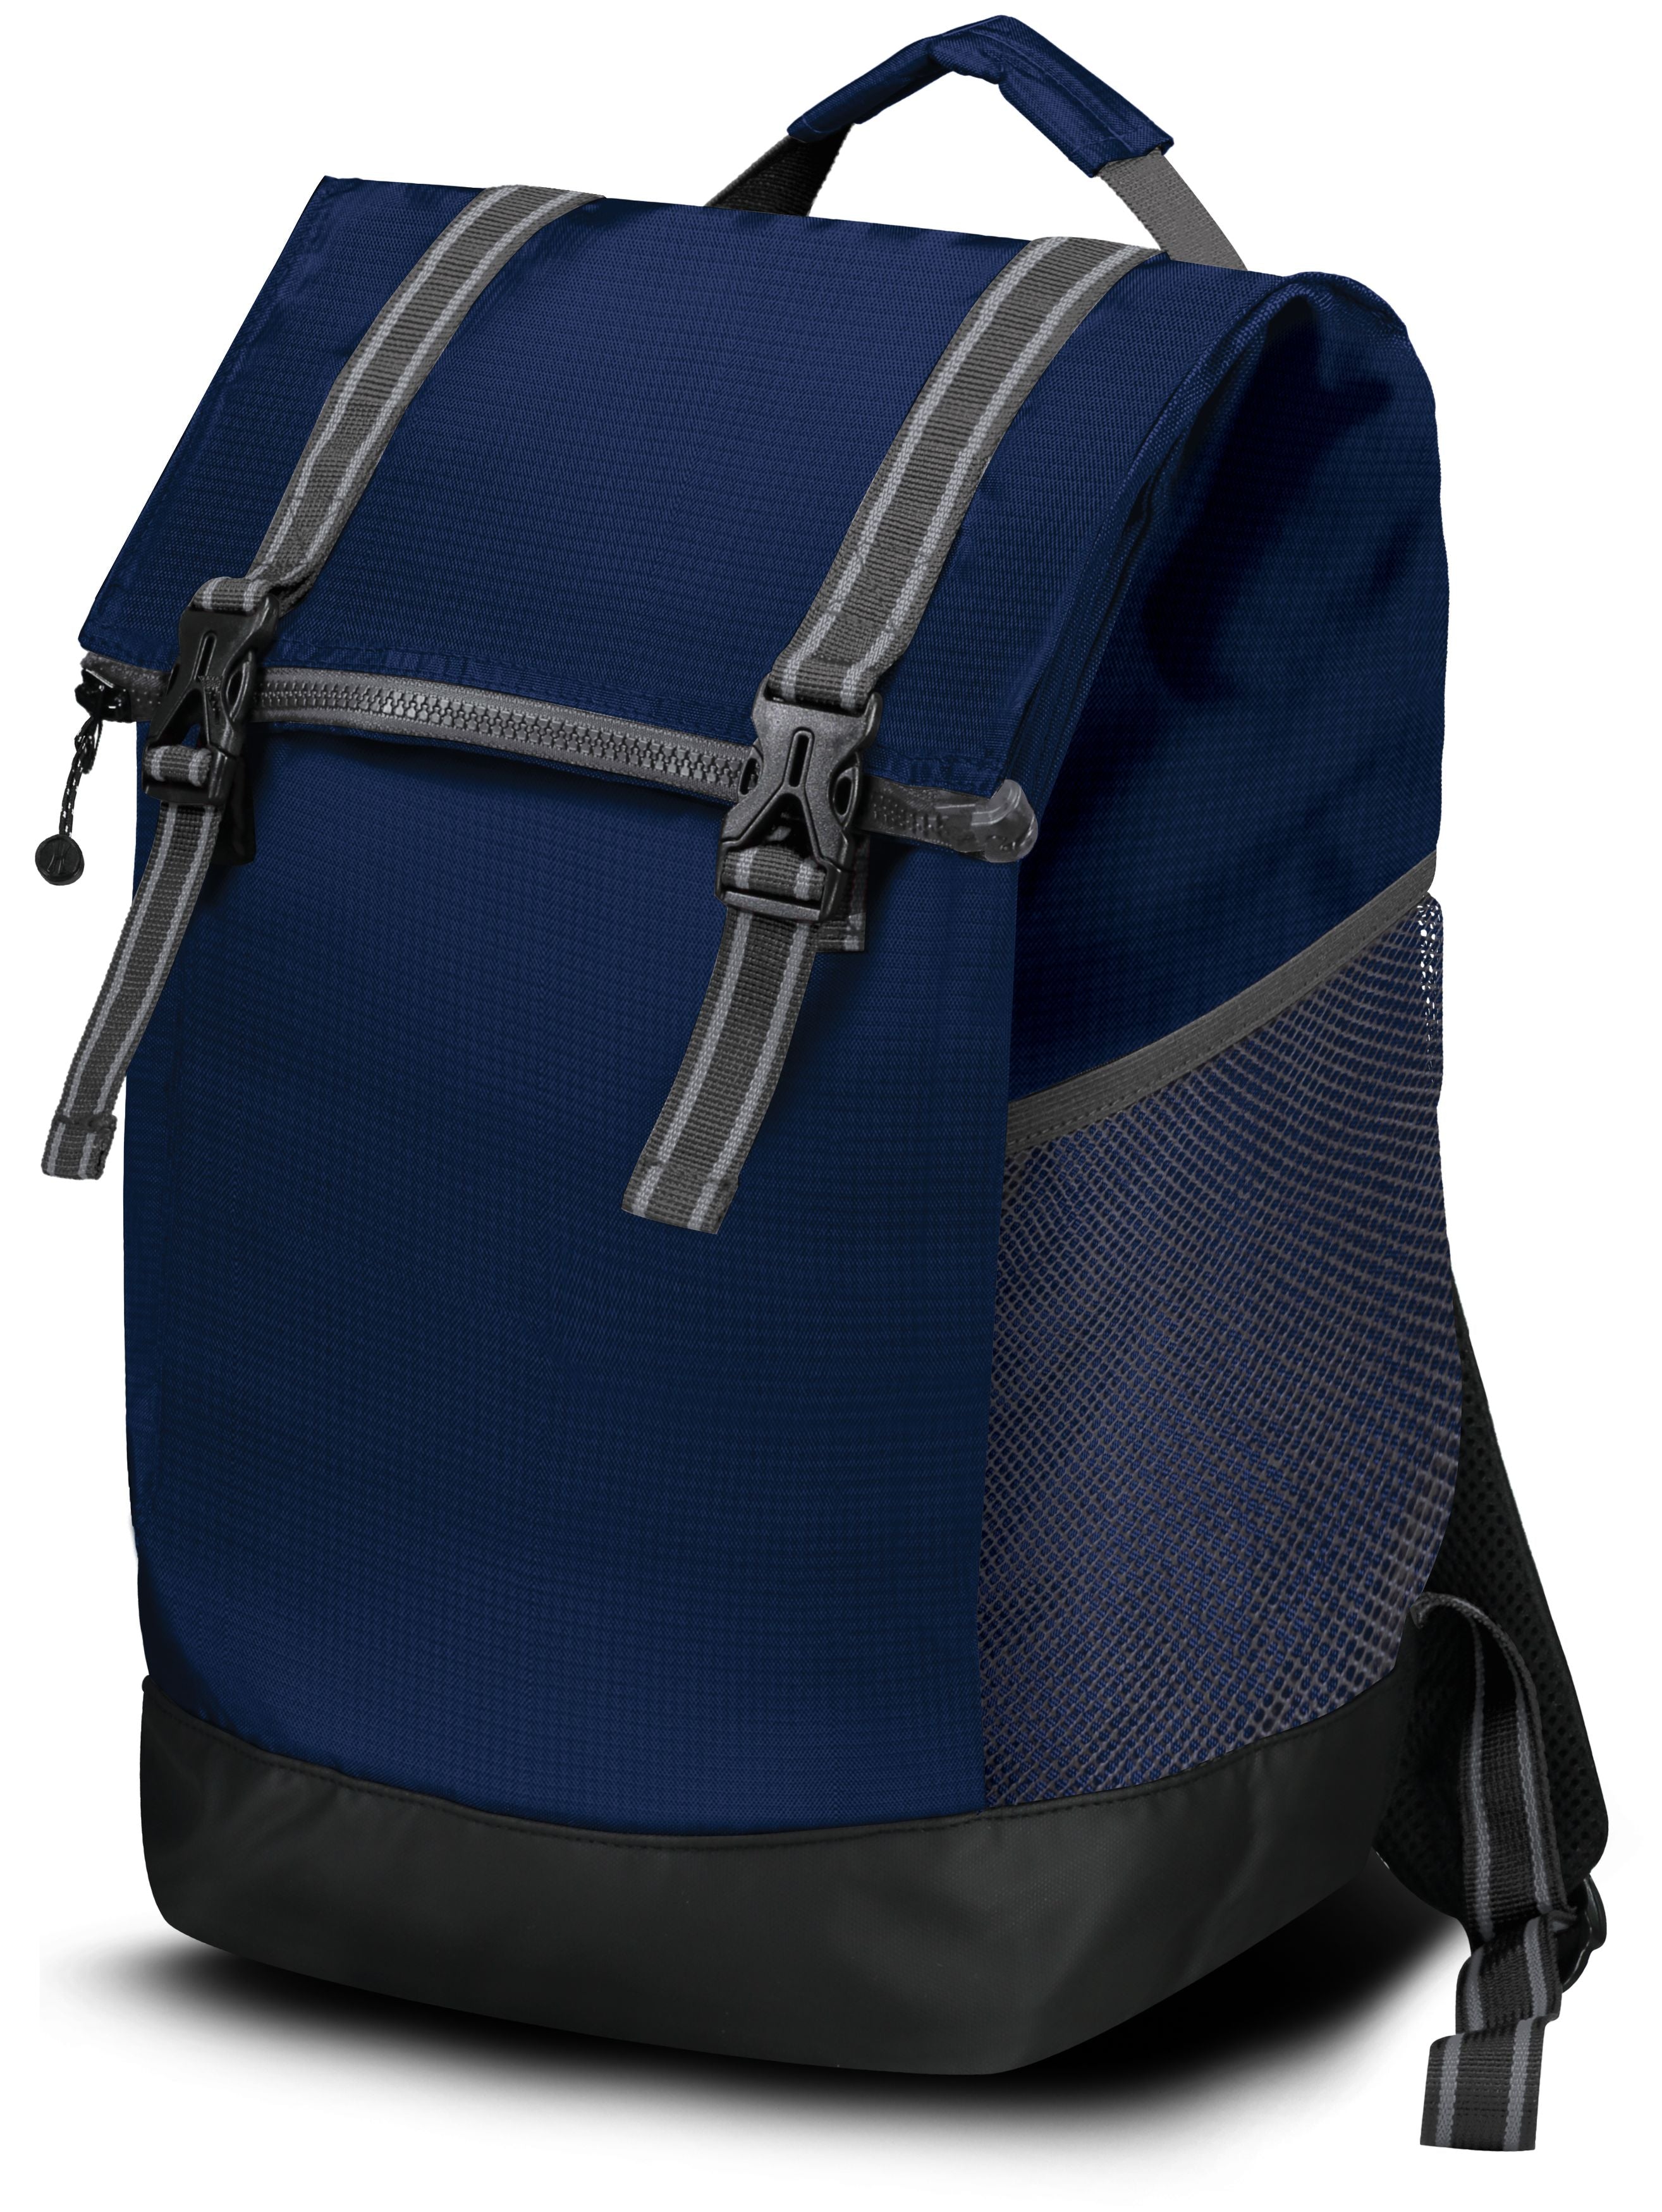 Holloway Expedition Backpack